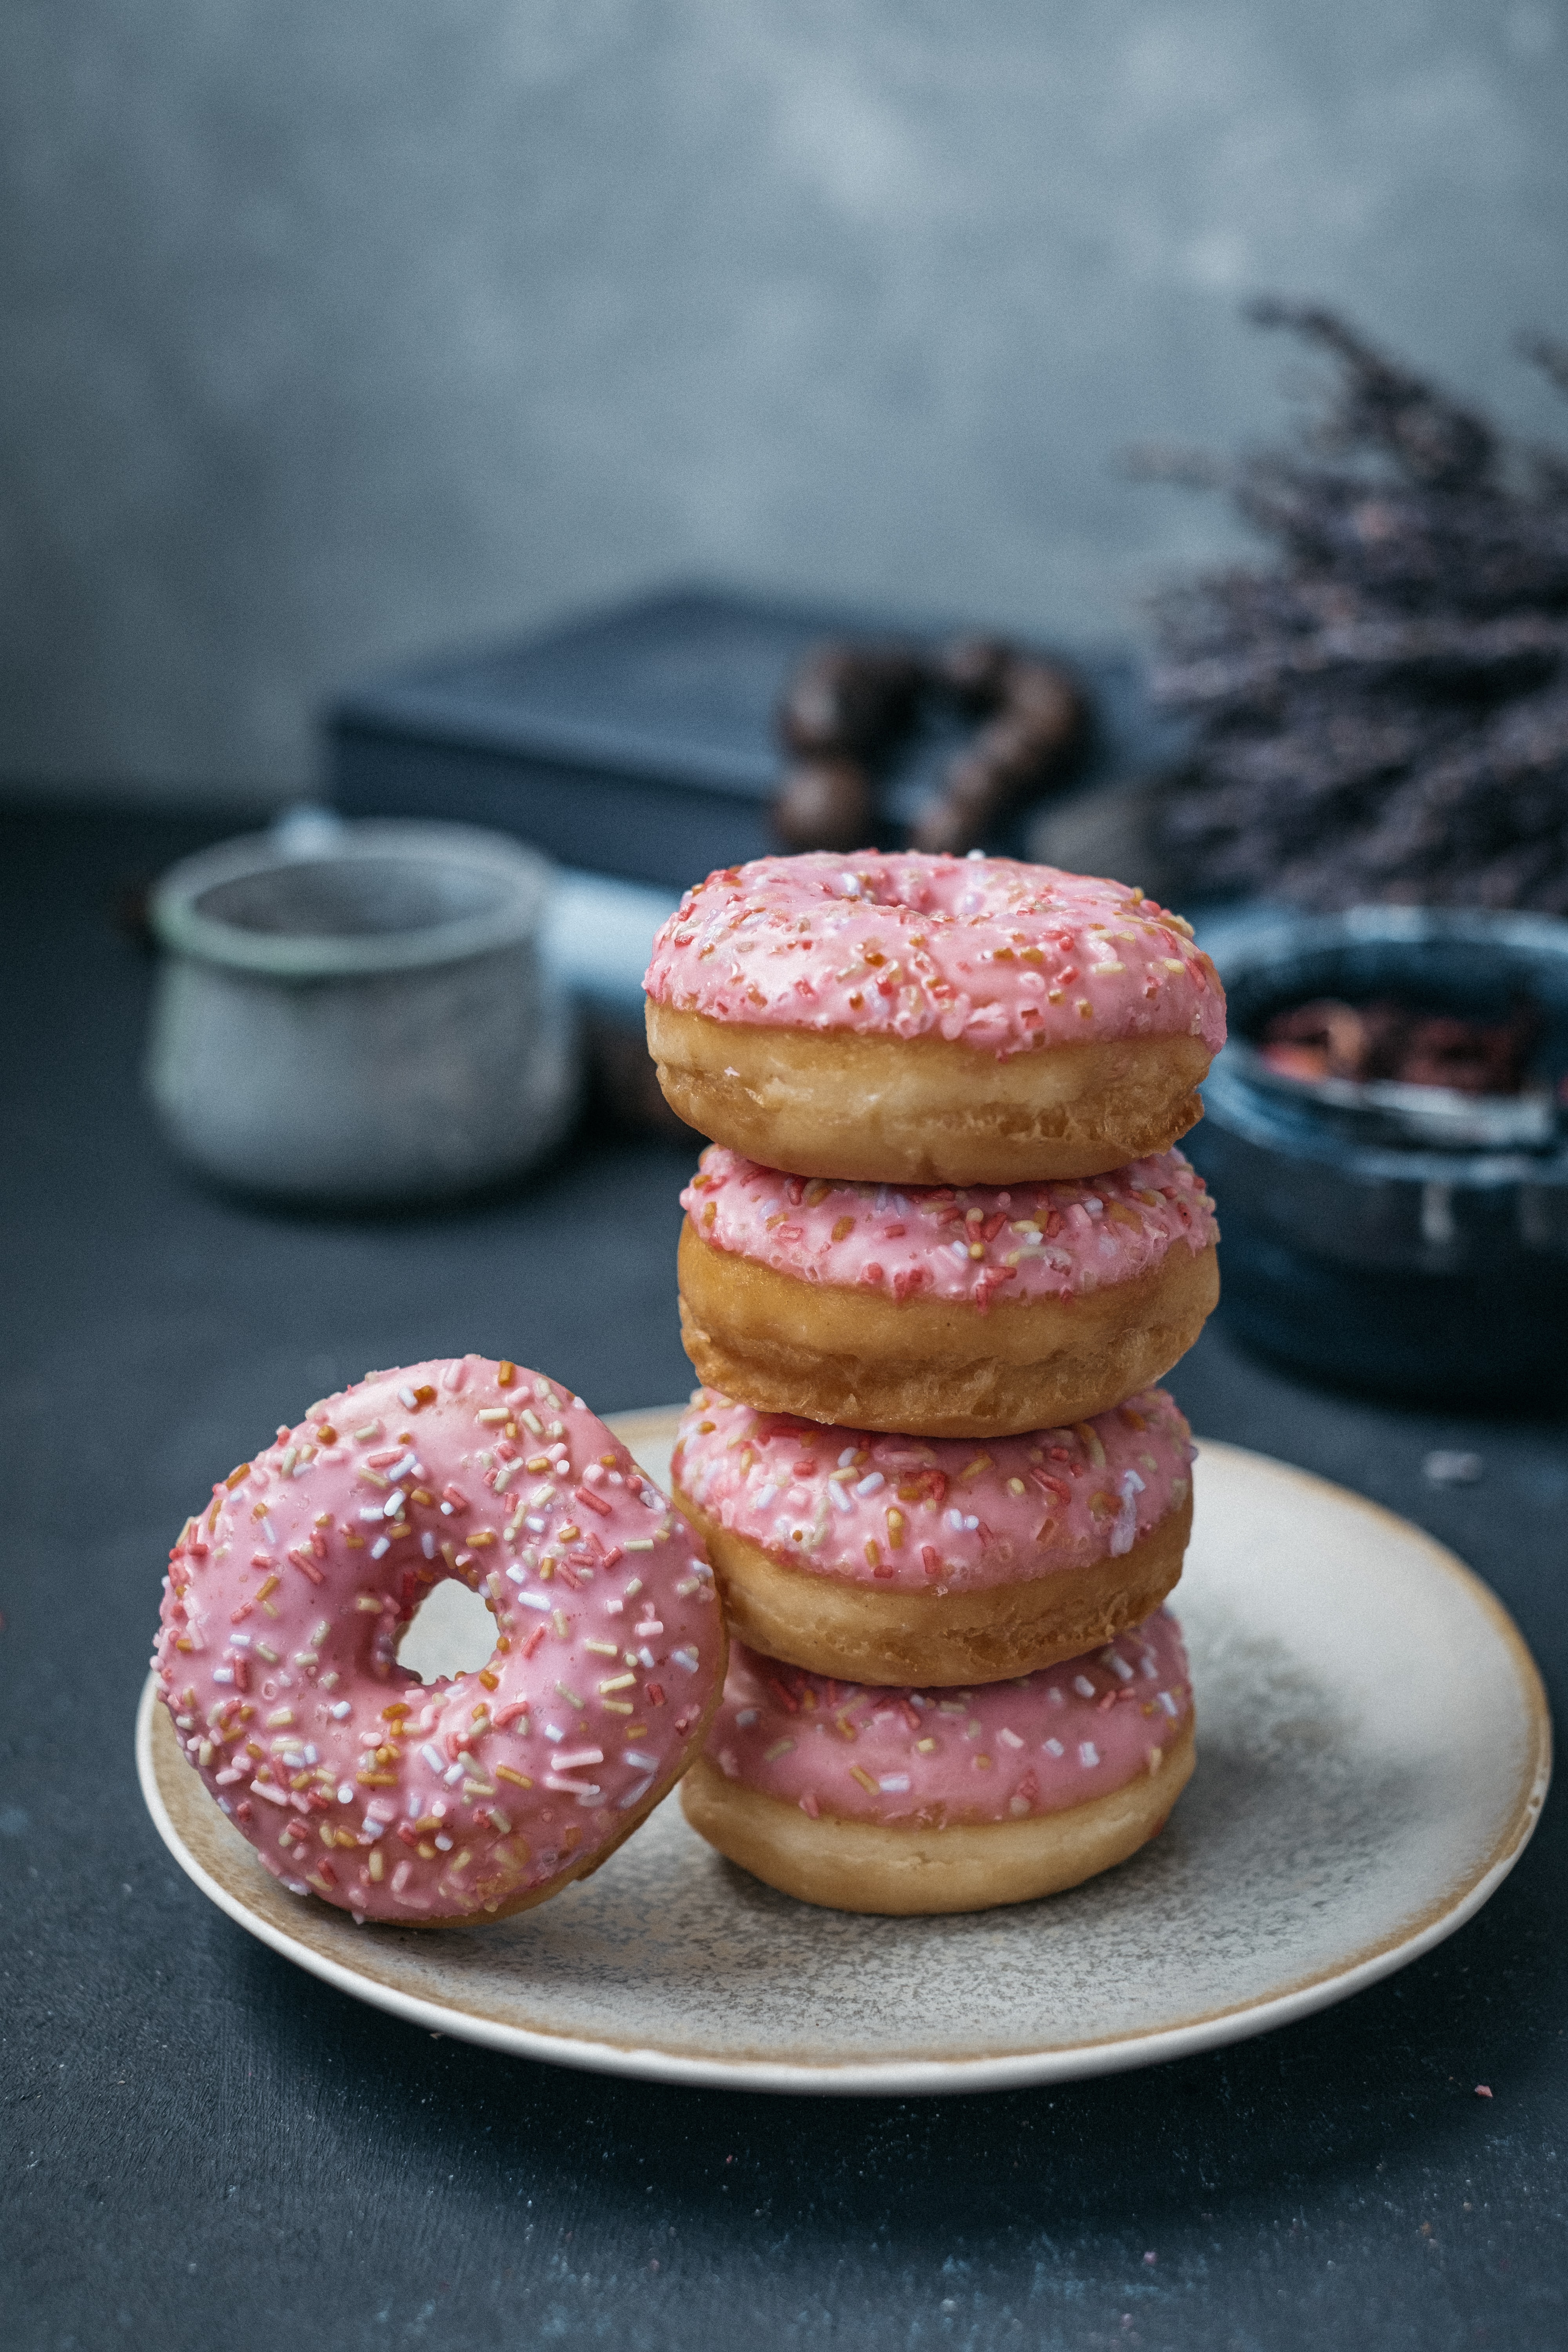 55687 download wallpaper food, still life, glaze, donut, doughnut screensavers and pictures for free